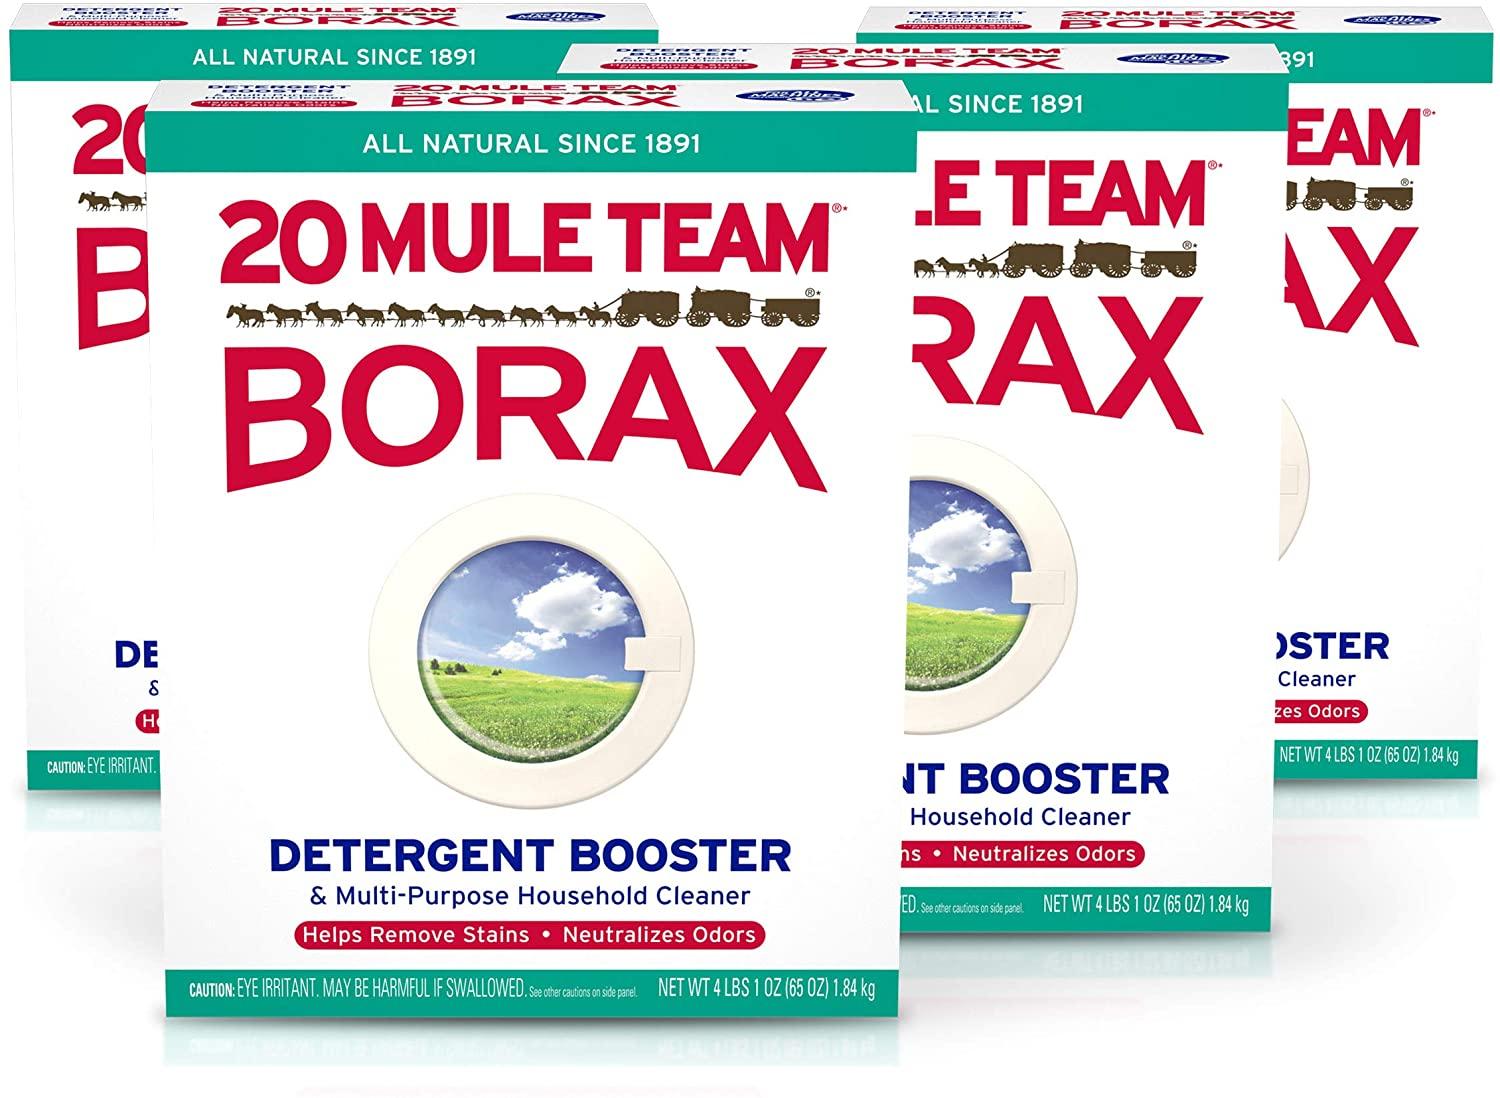 80 Mule Team Borax Detergent Booster & Multi-Purpose Household Cleaner for $13.19